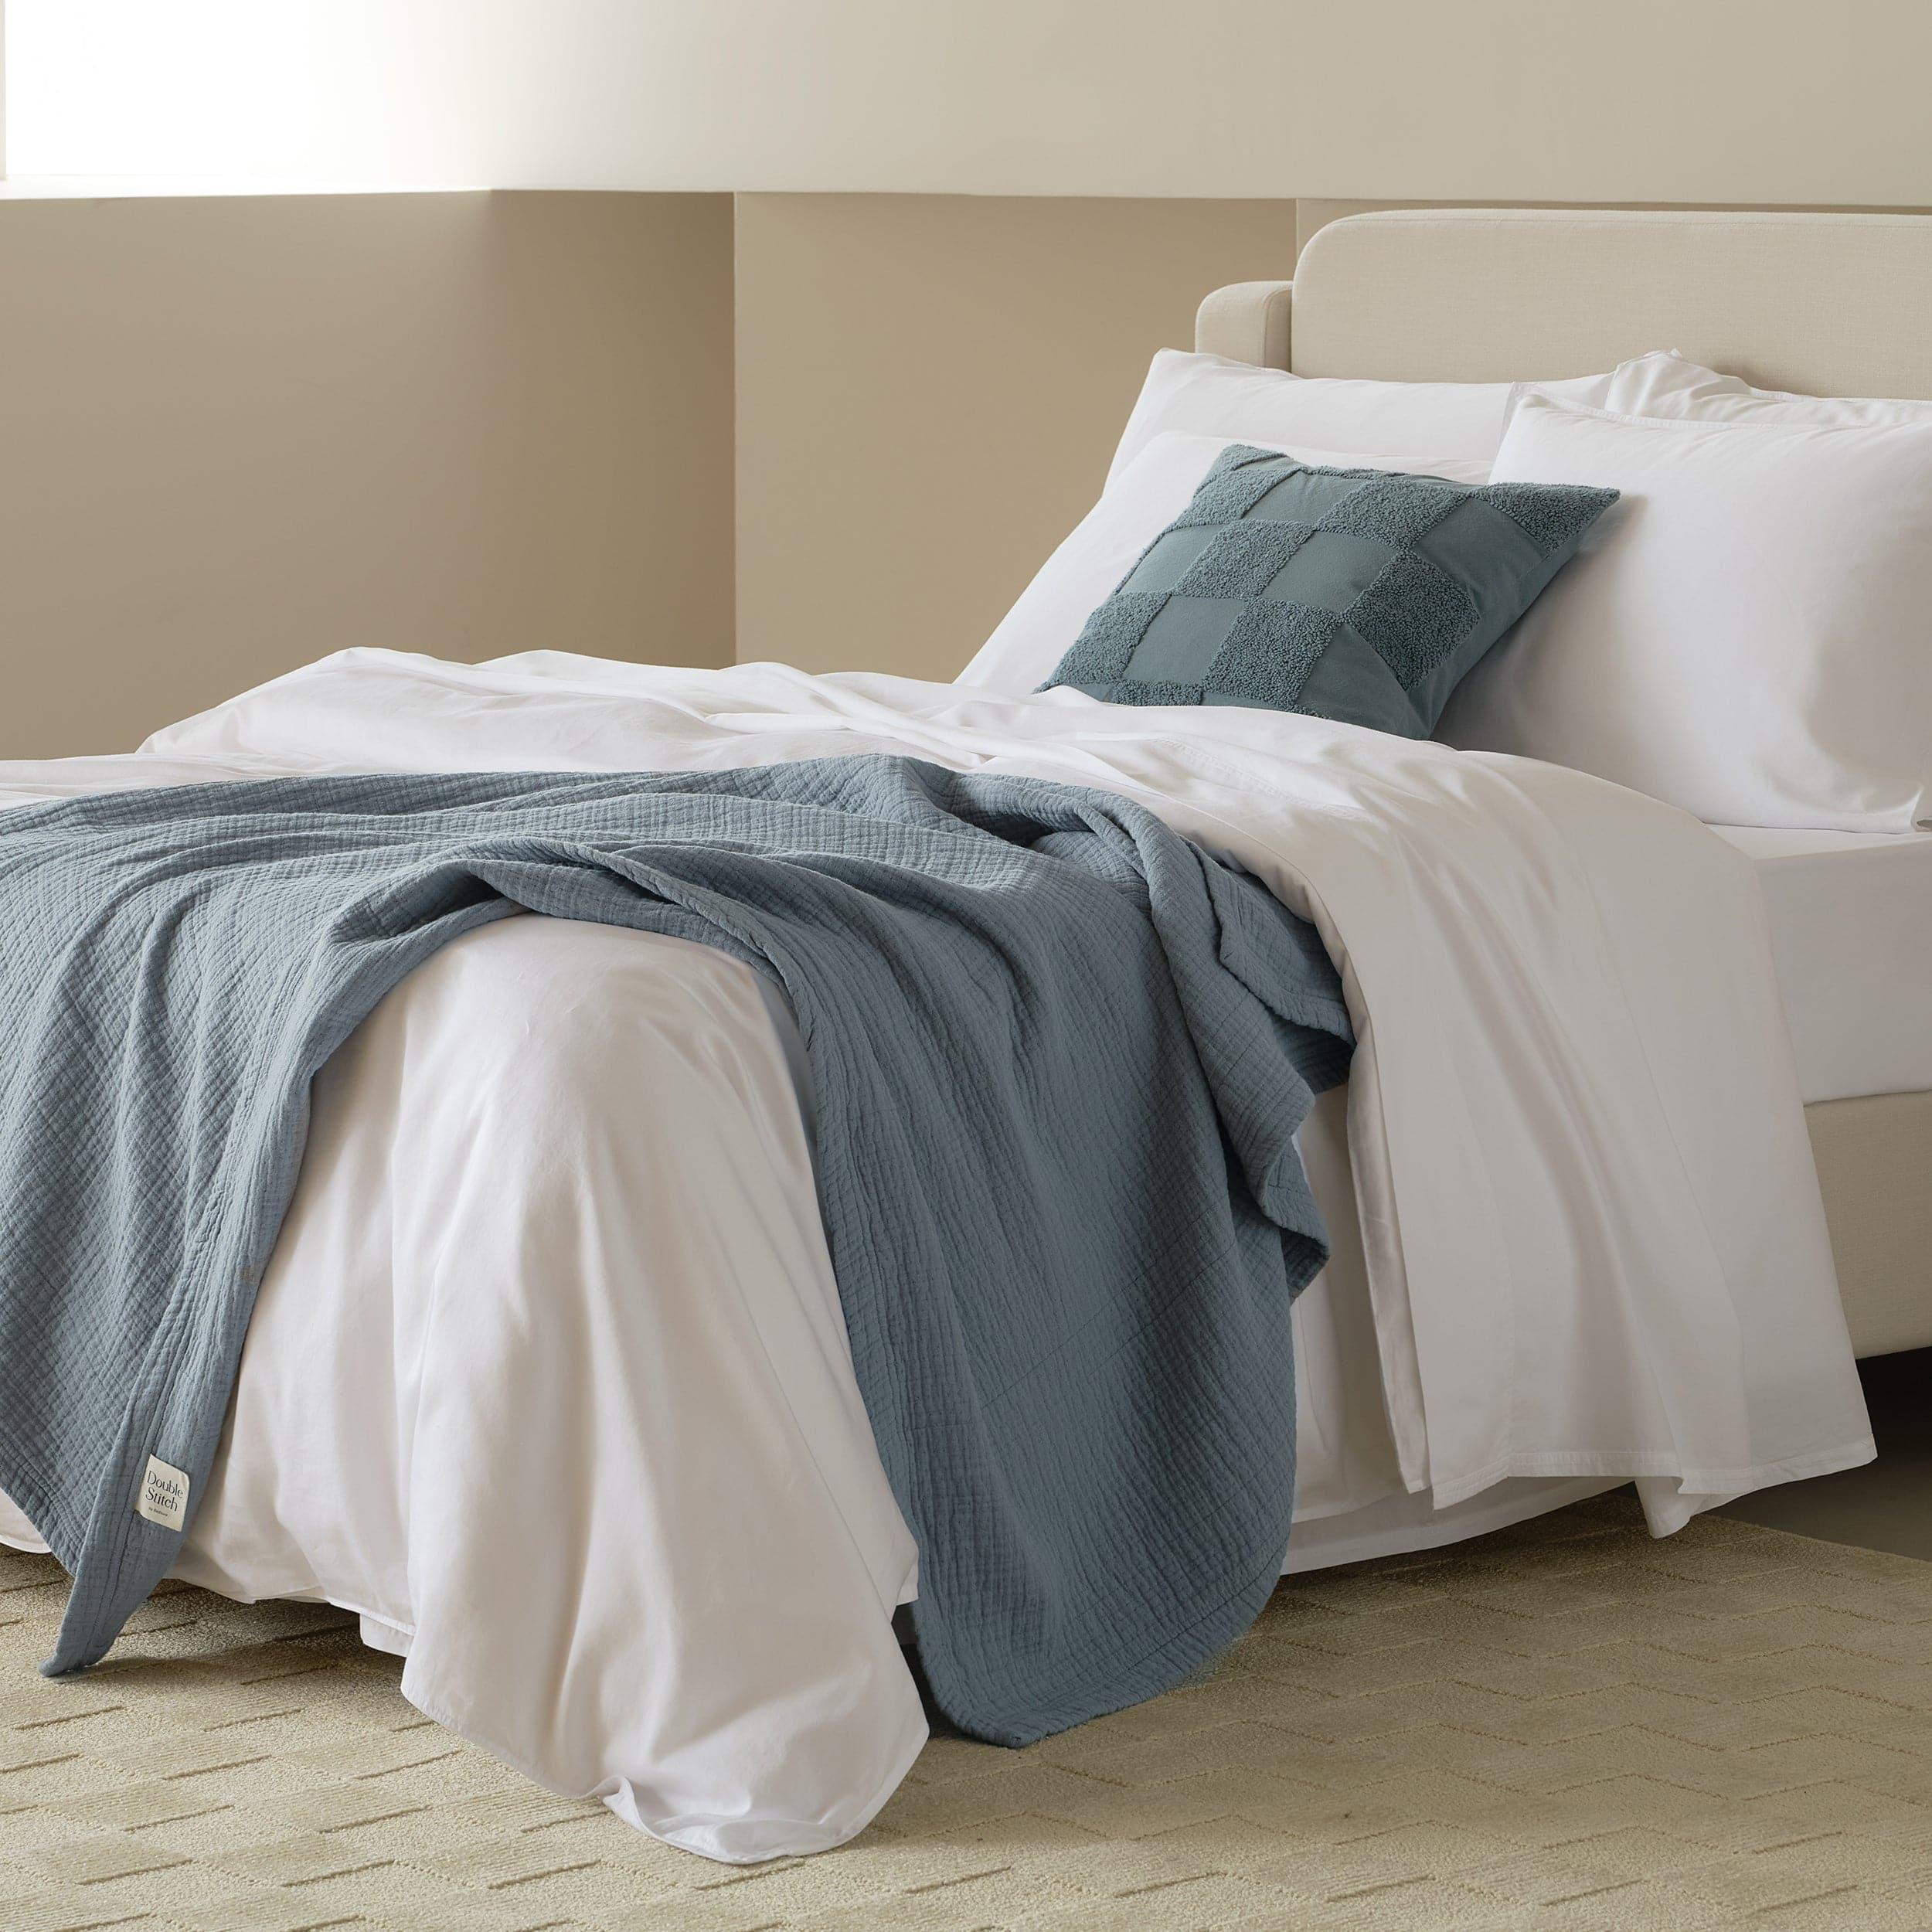 The queen duvet cover set I purchased is made of high-quality, soft cotton fabric.